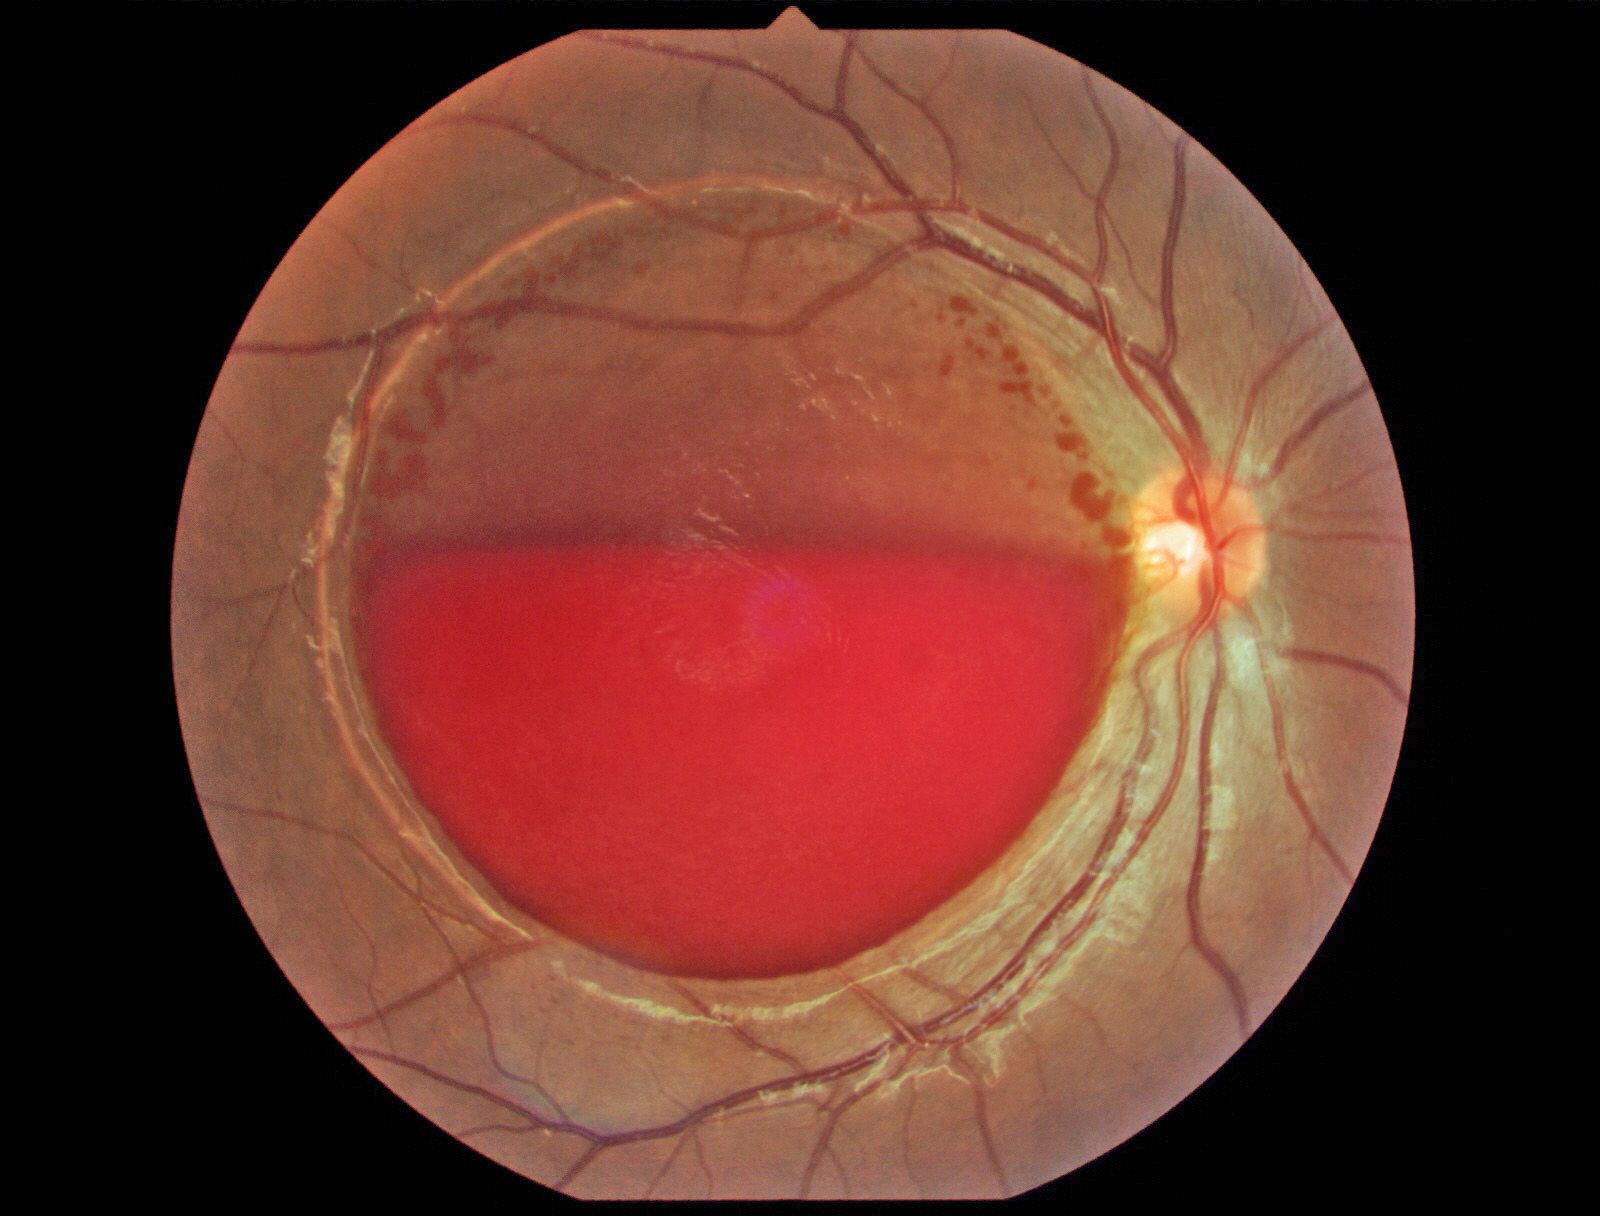 The patient presented with sudden vision loss following delivery of her baby. There is a round detachment of the ILM throughout the macula with layered blood, which resolved over a period of 20 weeks.